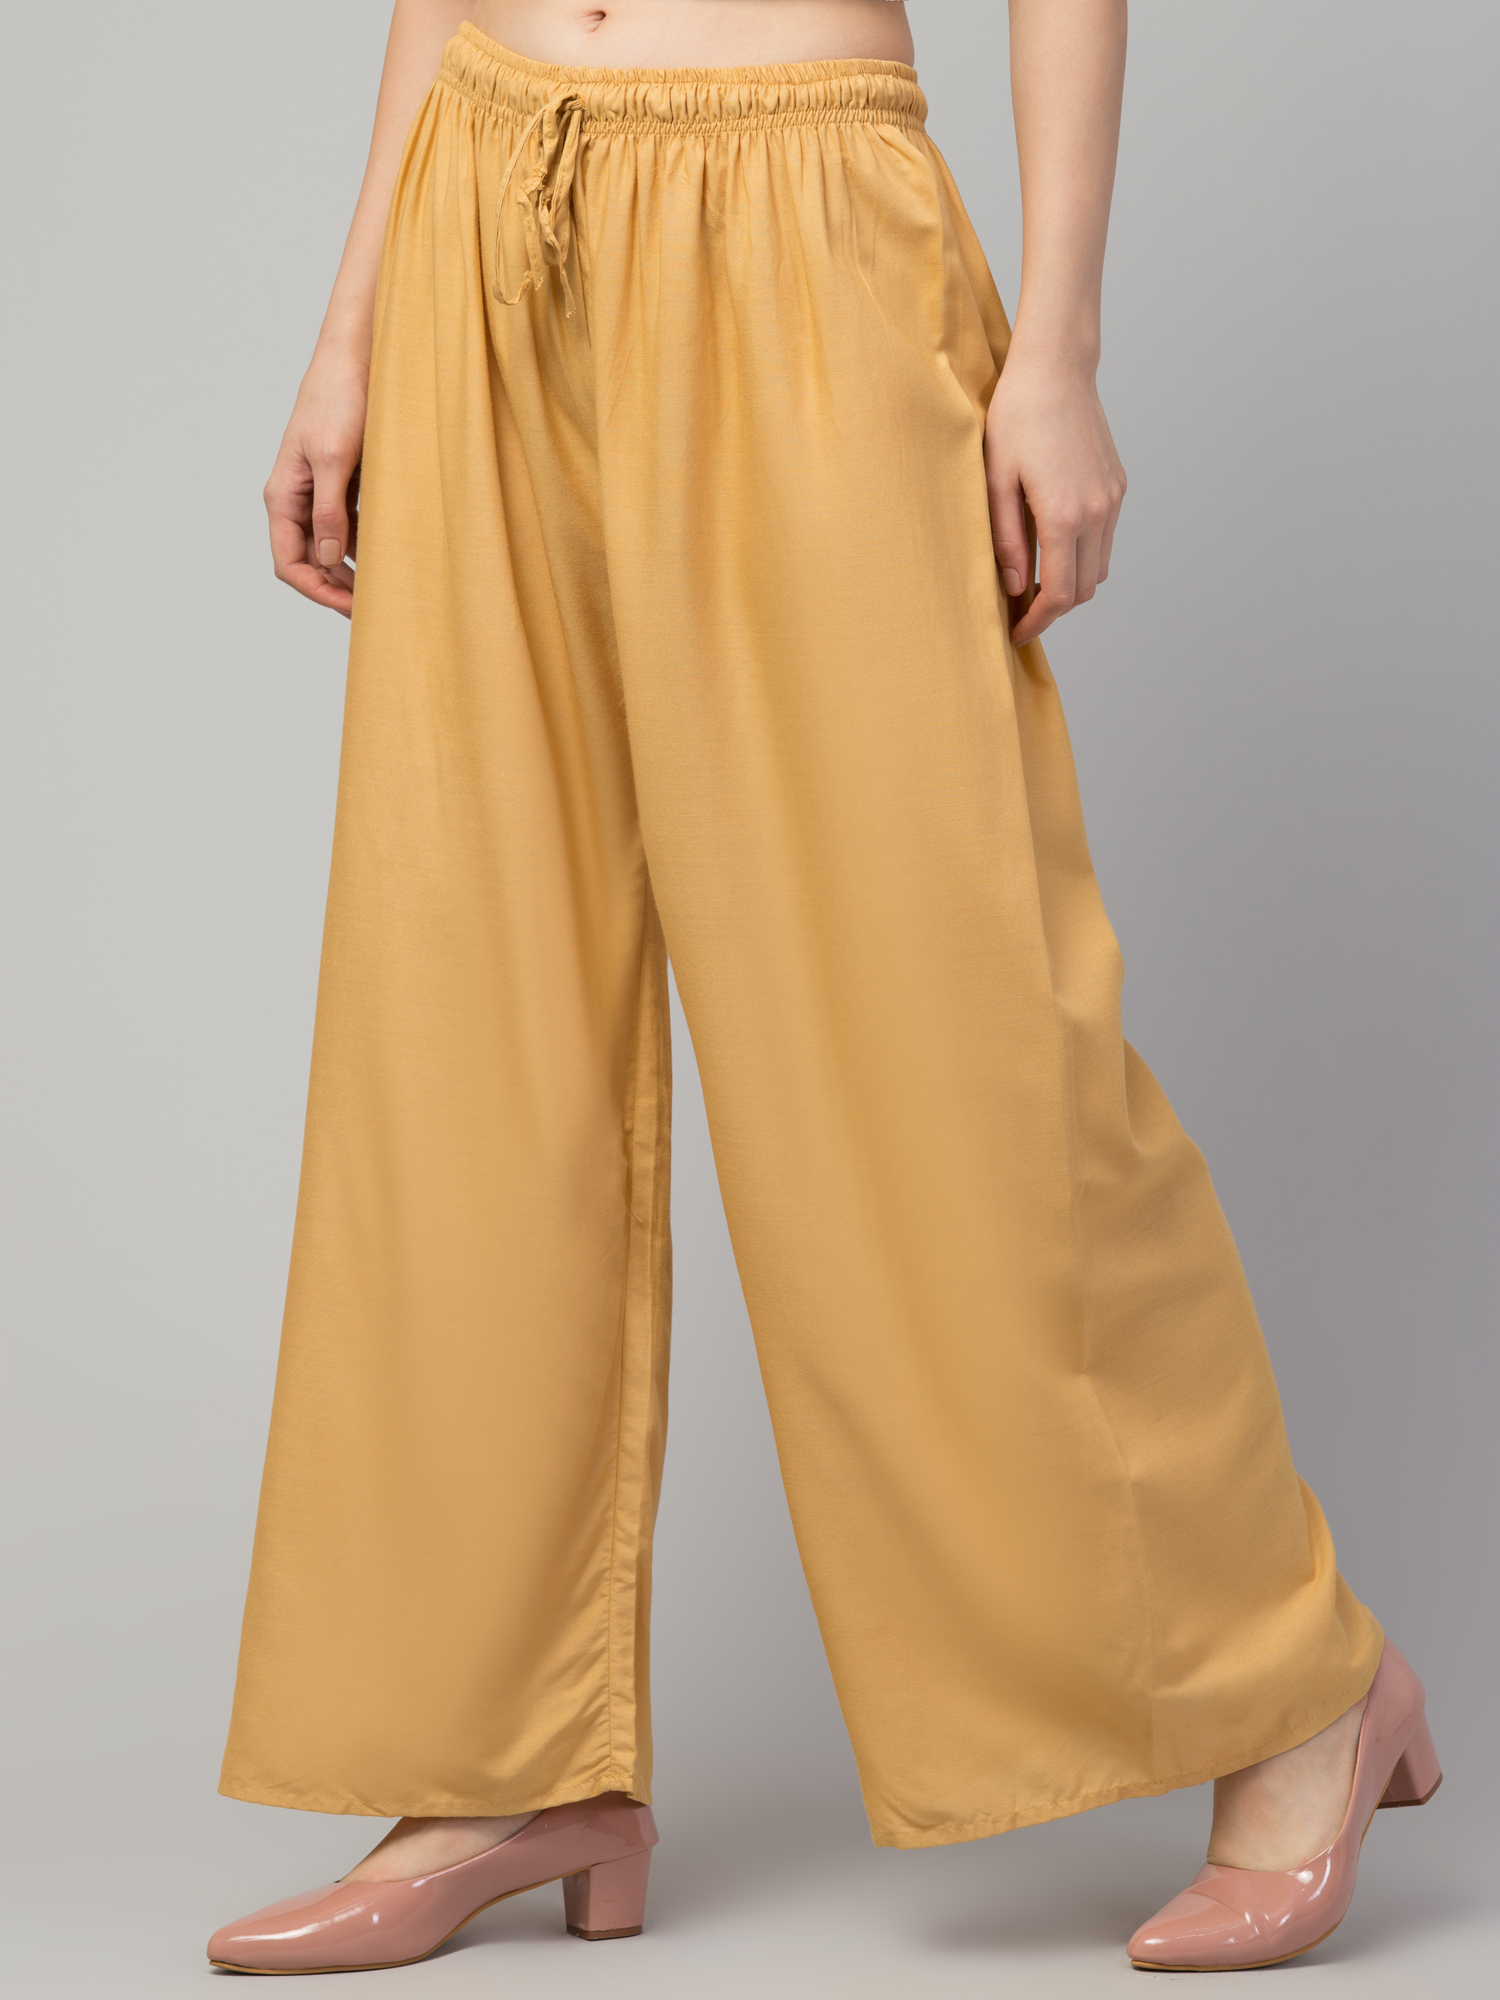 High Waisted Wide Leg Pants | Earthbound Trading Co.